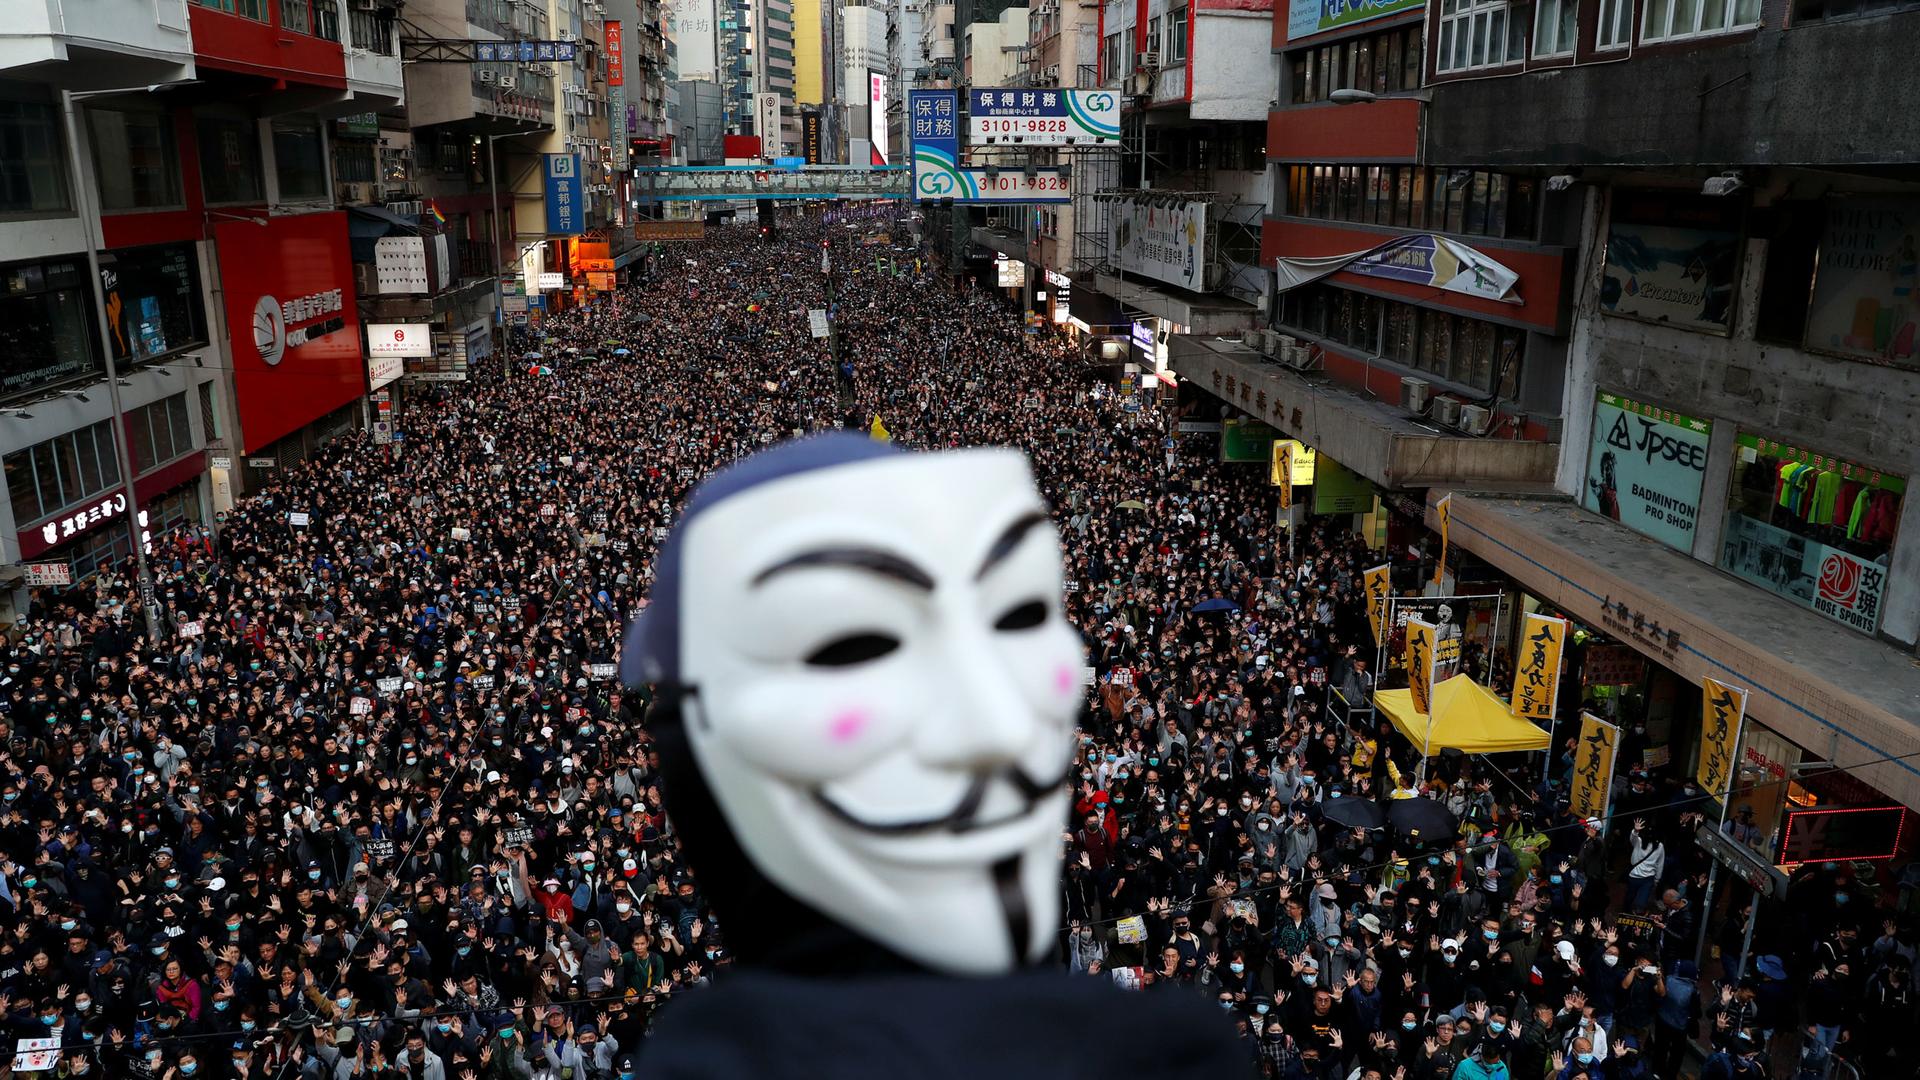 A protester wearing a Guy Fawkes mask attends a Human Rights Day march organized by the Civil Human Right Front, in Hong Kong, China, on Dec. 8, 2019.